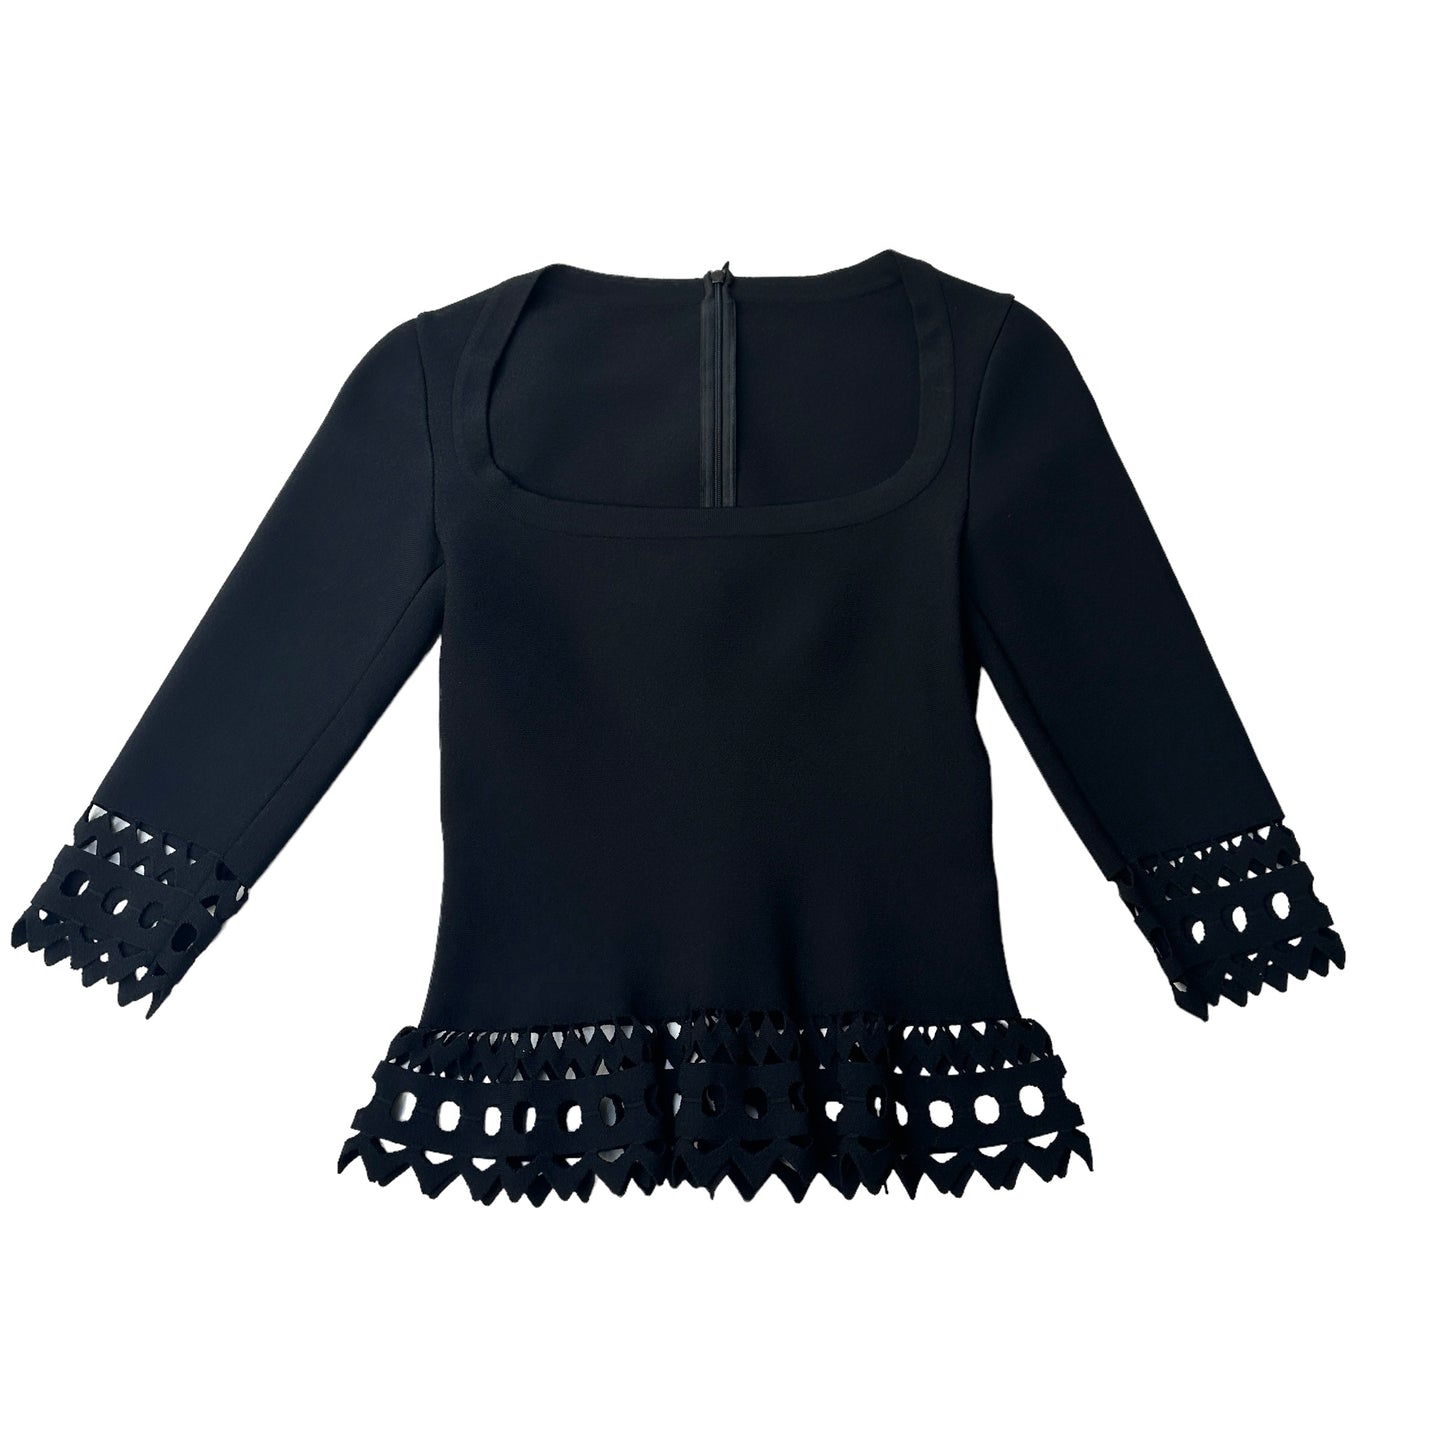 Black Fitted Eyelet Top - S